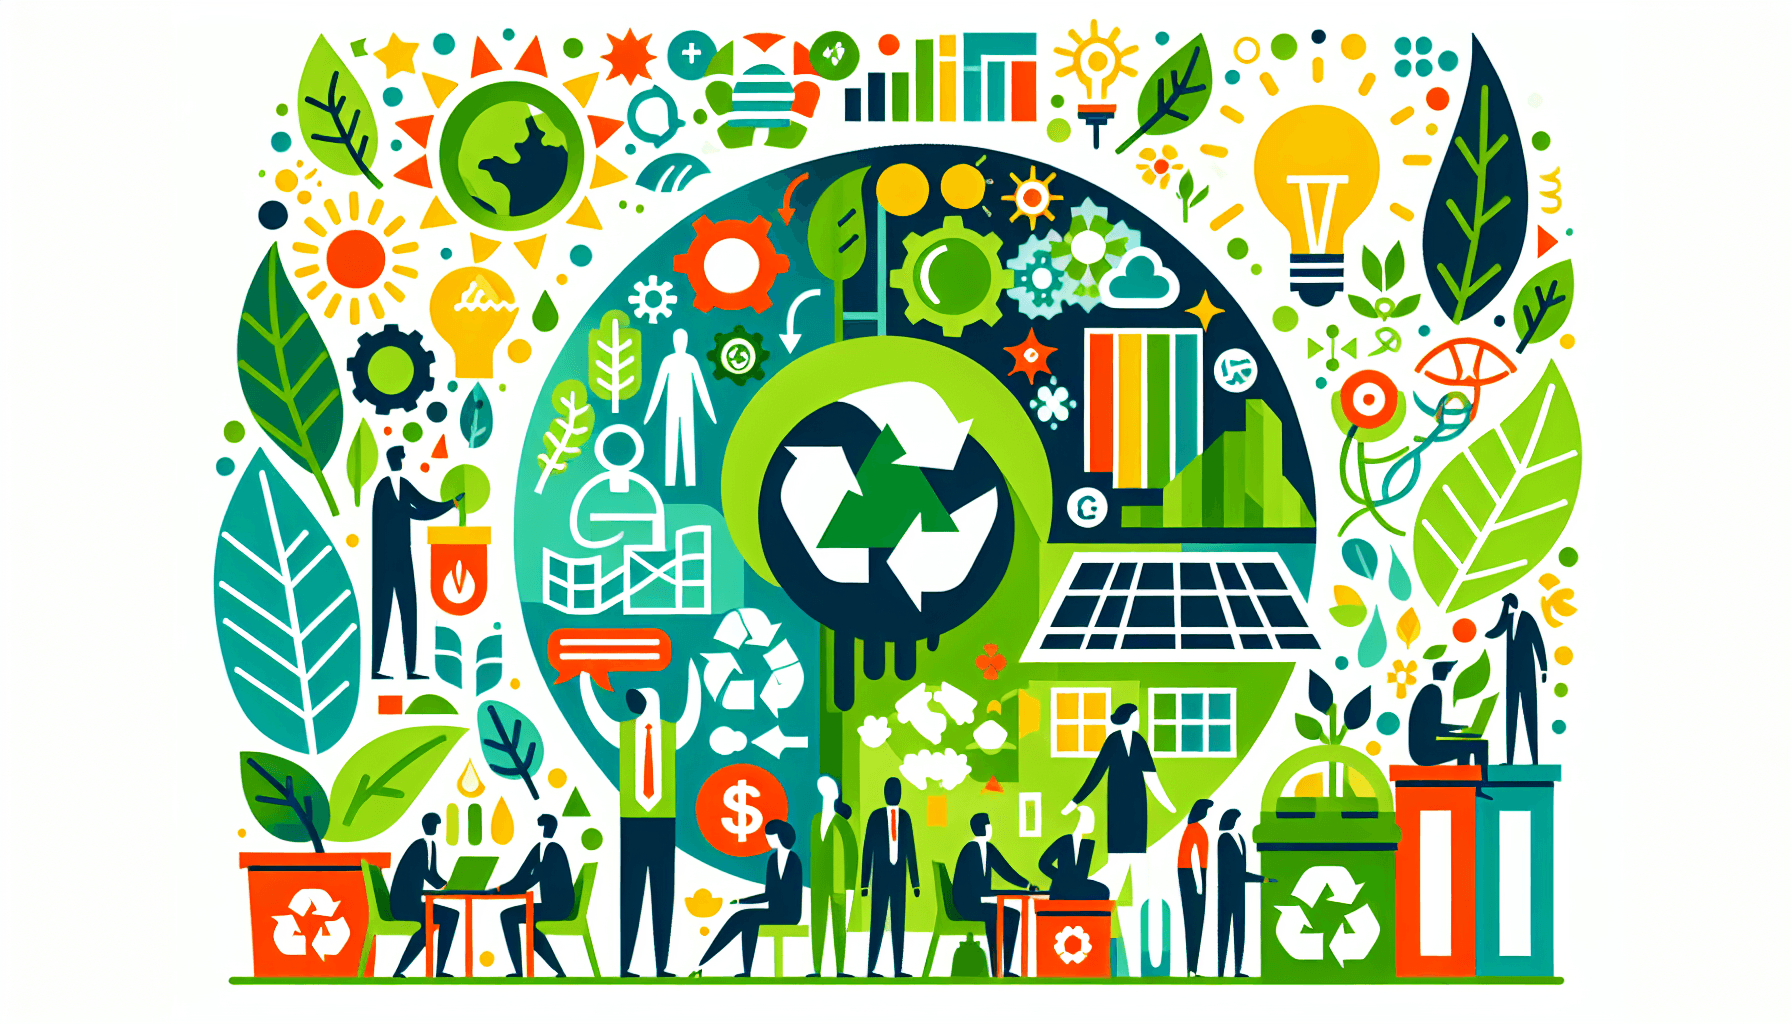 What is considered a green business? in flat illustration style and white background, red #f47574, green #88c7a8, yellow #fcc44b, and blue #645bc8 colors.